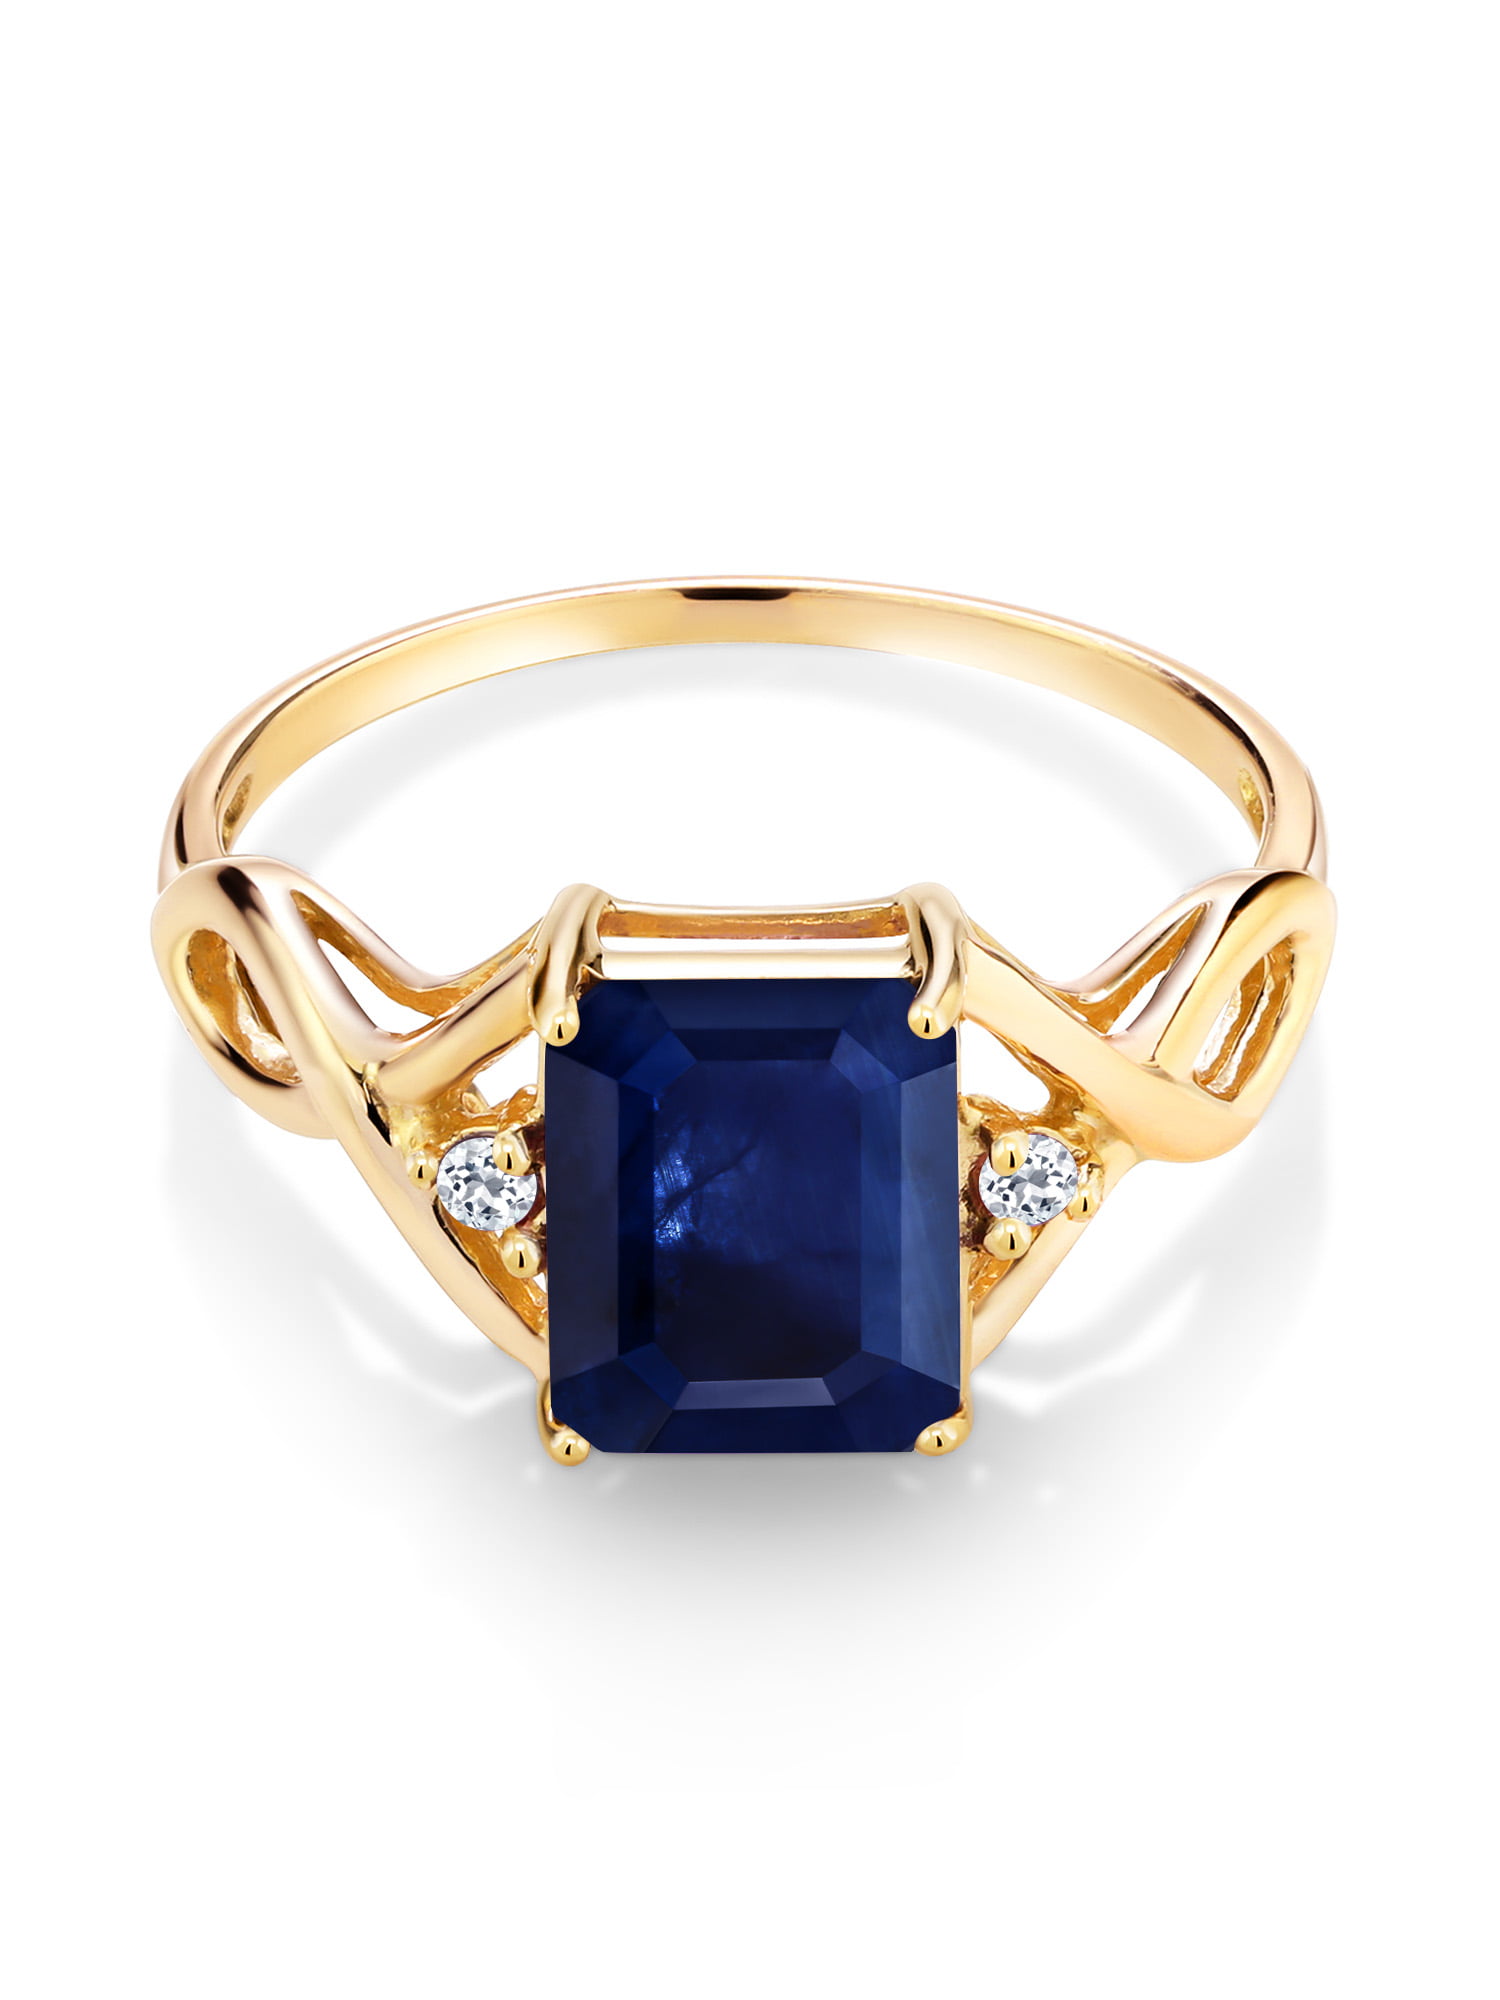 2.49CT Silver Or 14K Solid Gold Blue Sapphire Anniversary Wedding Band Ring S7 